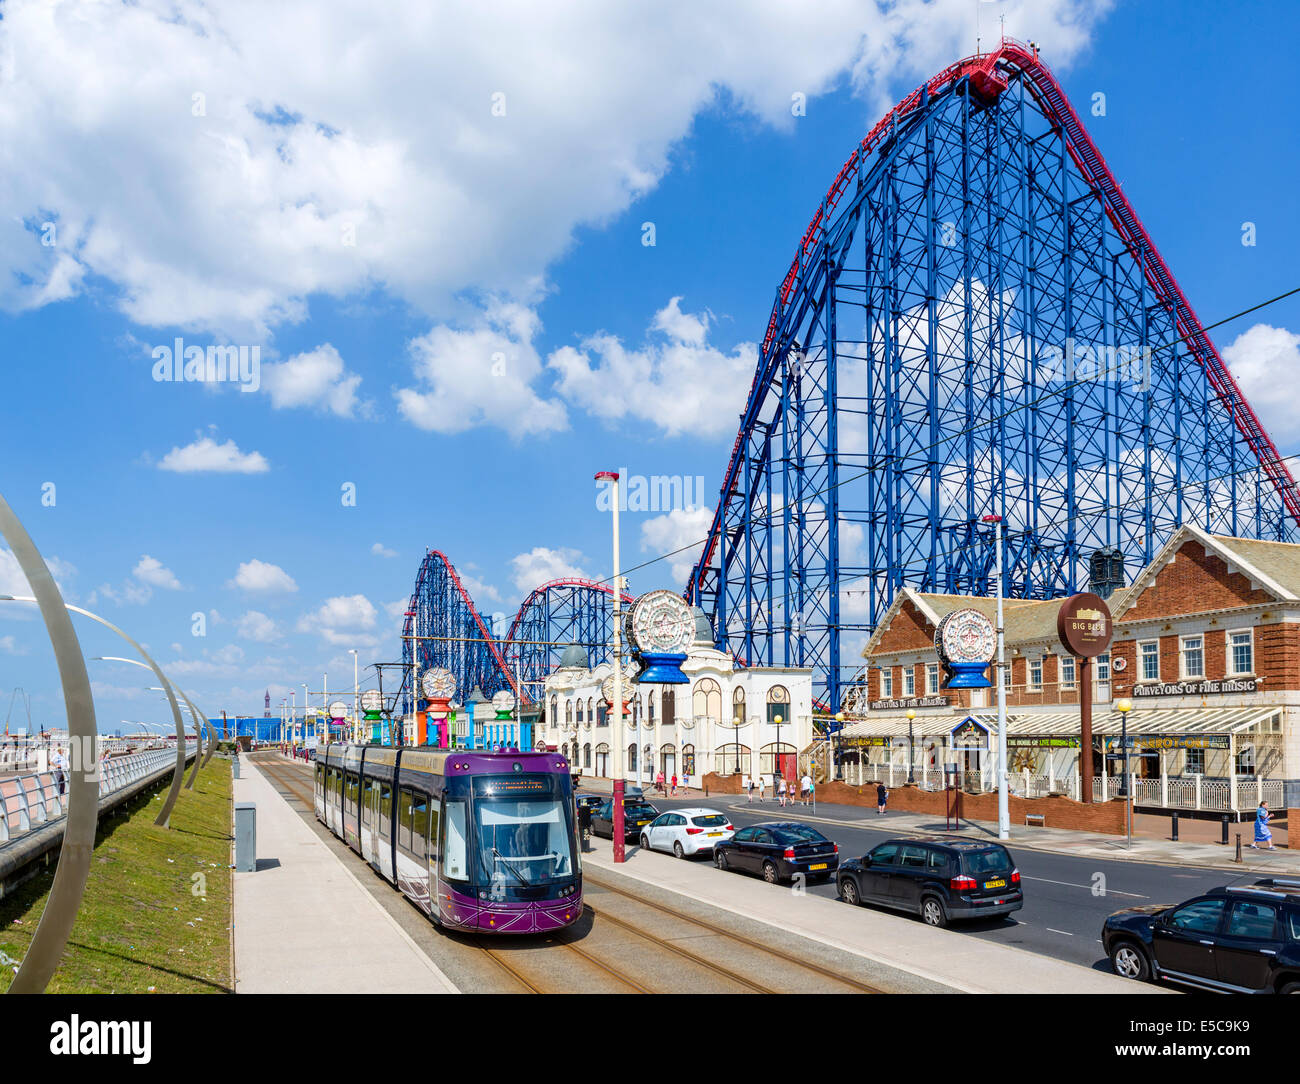 Tram on the promenade in front of the Big One roller-coaster at the Pleasure Beach amusement park, Blackpool, Lancashire, UK Stock Photo